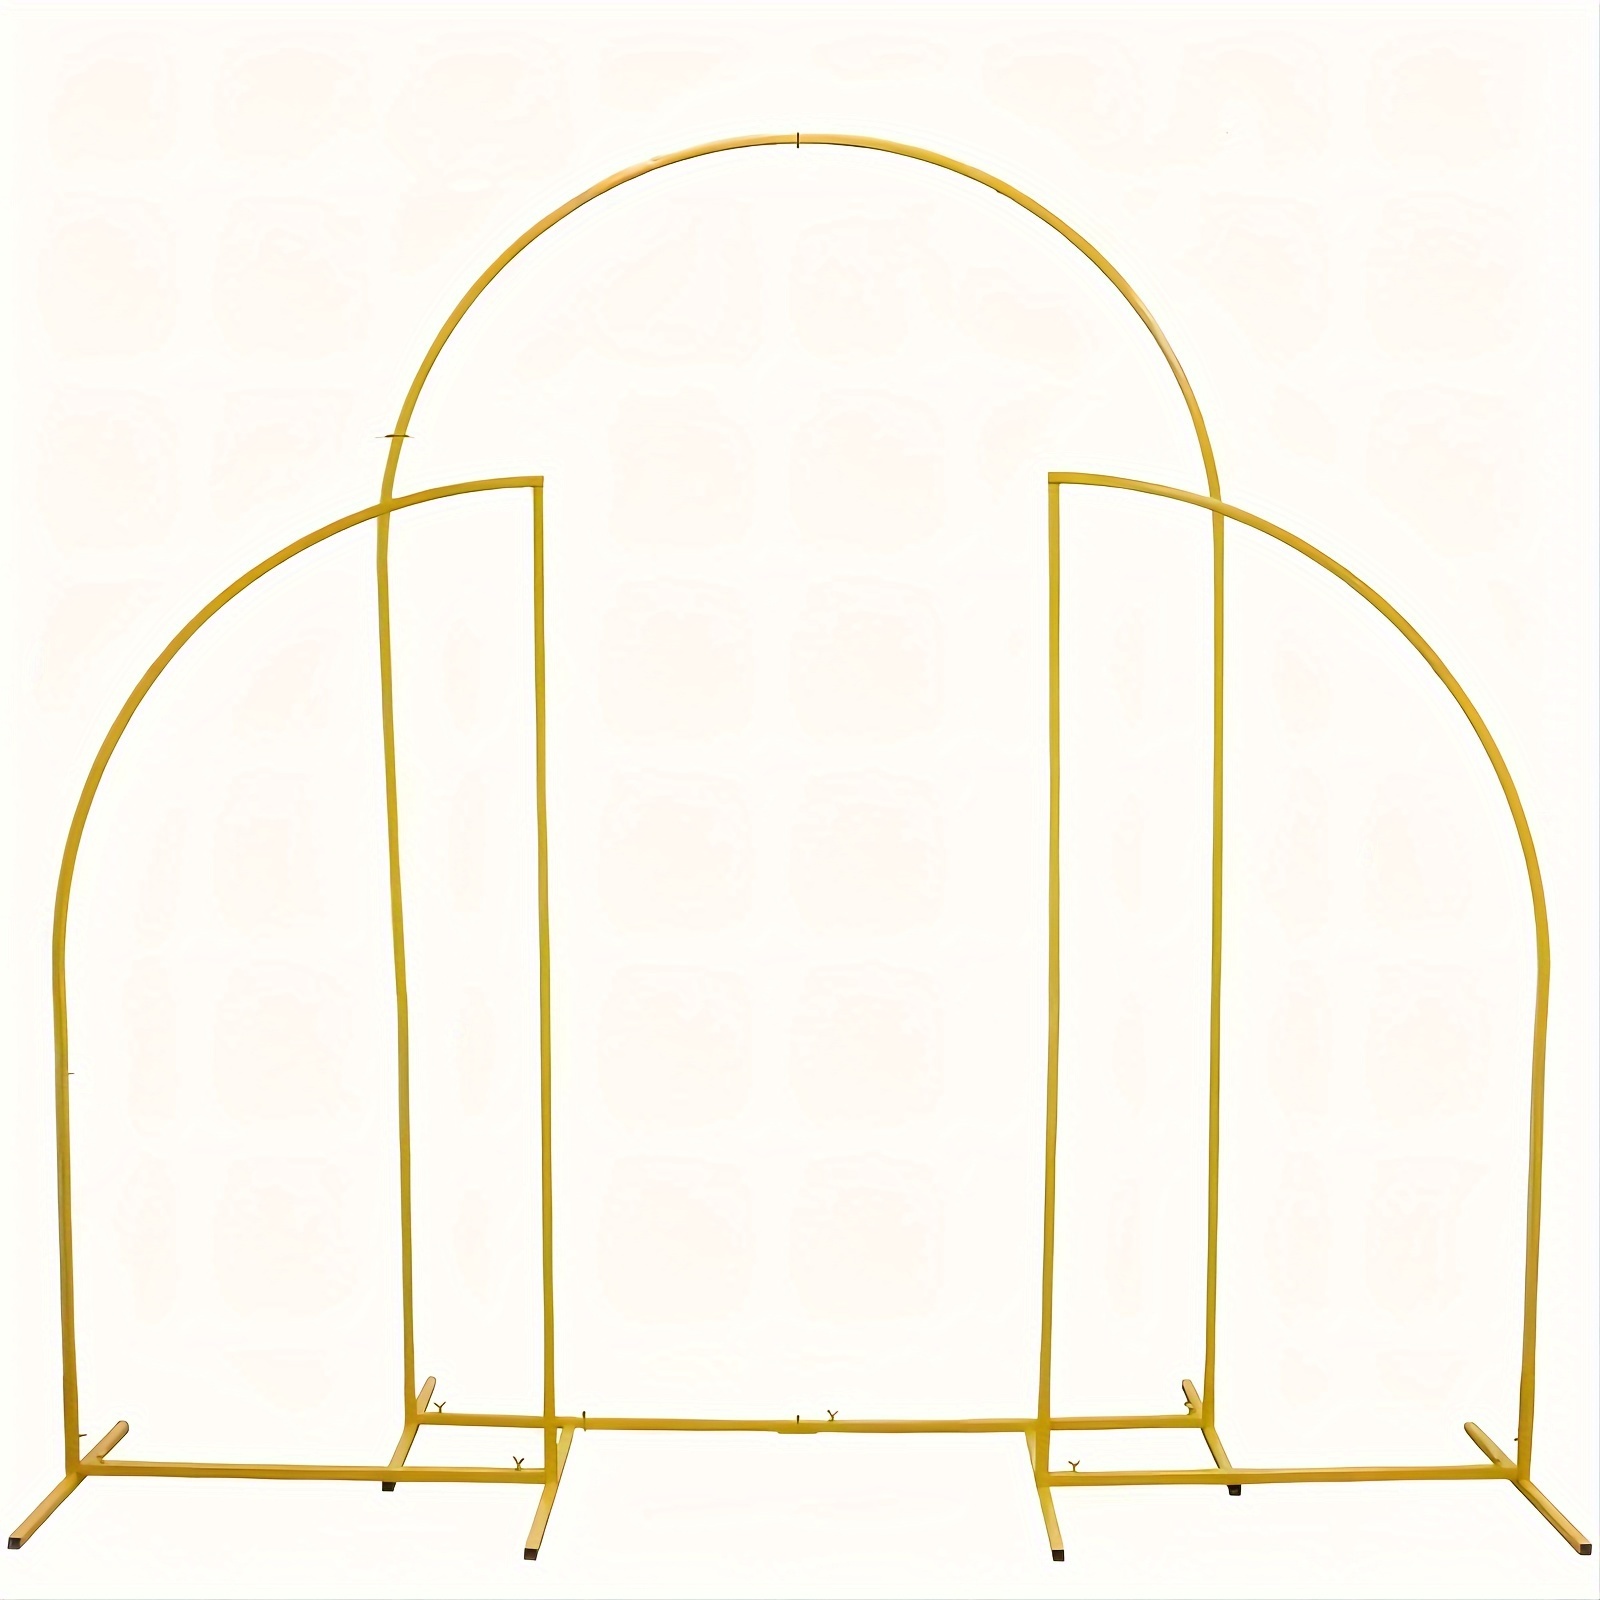 

Set Of 3 Metal Arch Background Stand, Golden Wedding Arch Balloon Arch Door Arch Frame, Suitable For Ceremony Anniversary Birthday Party Celebration Outdoor Indoor Graduation Decoration